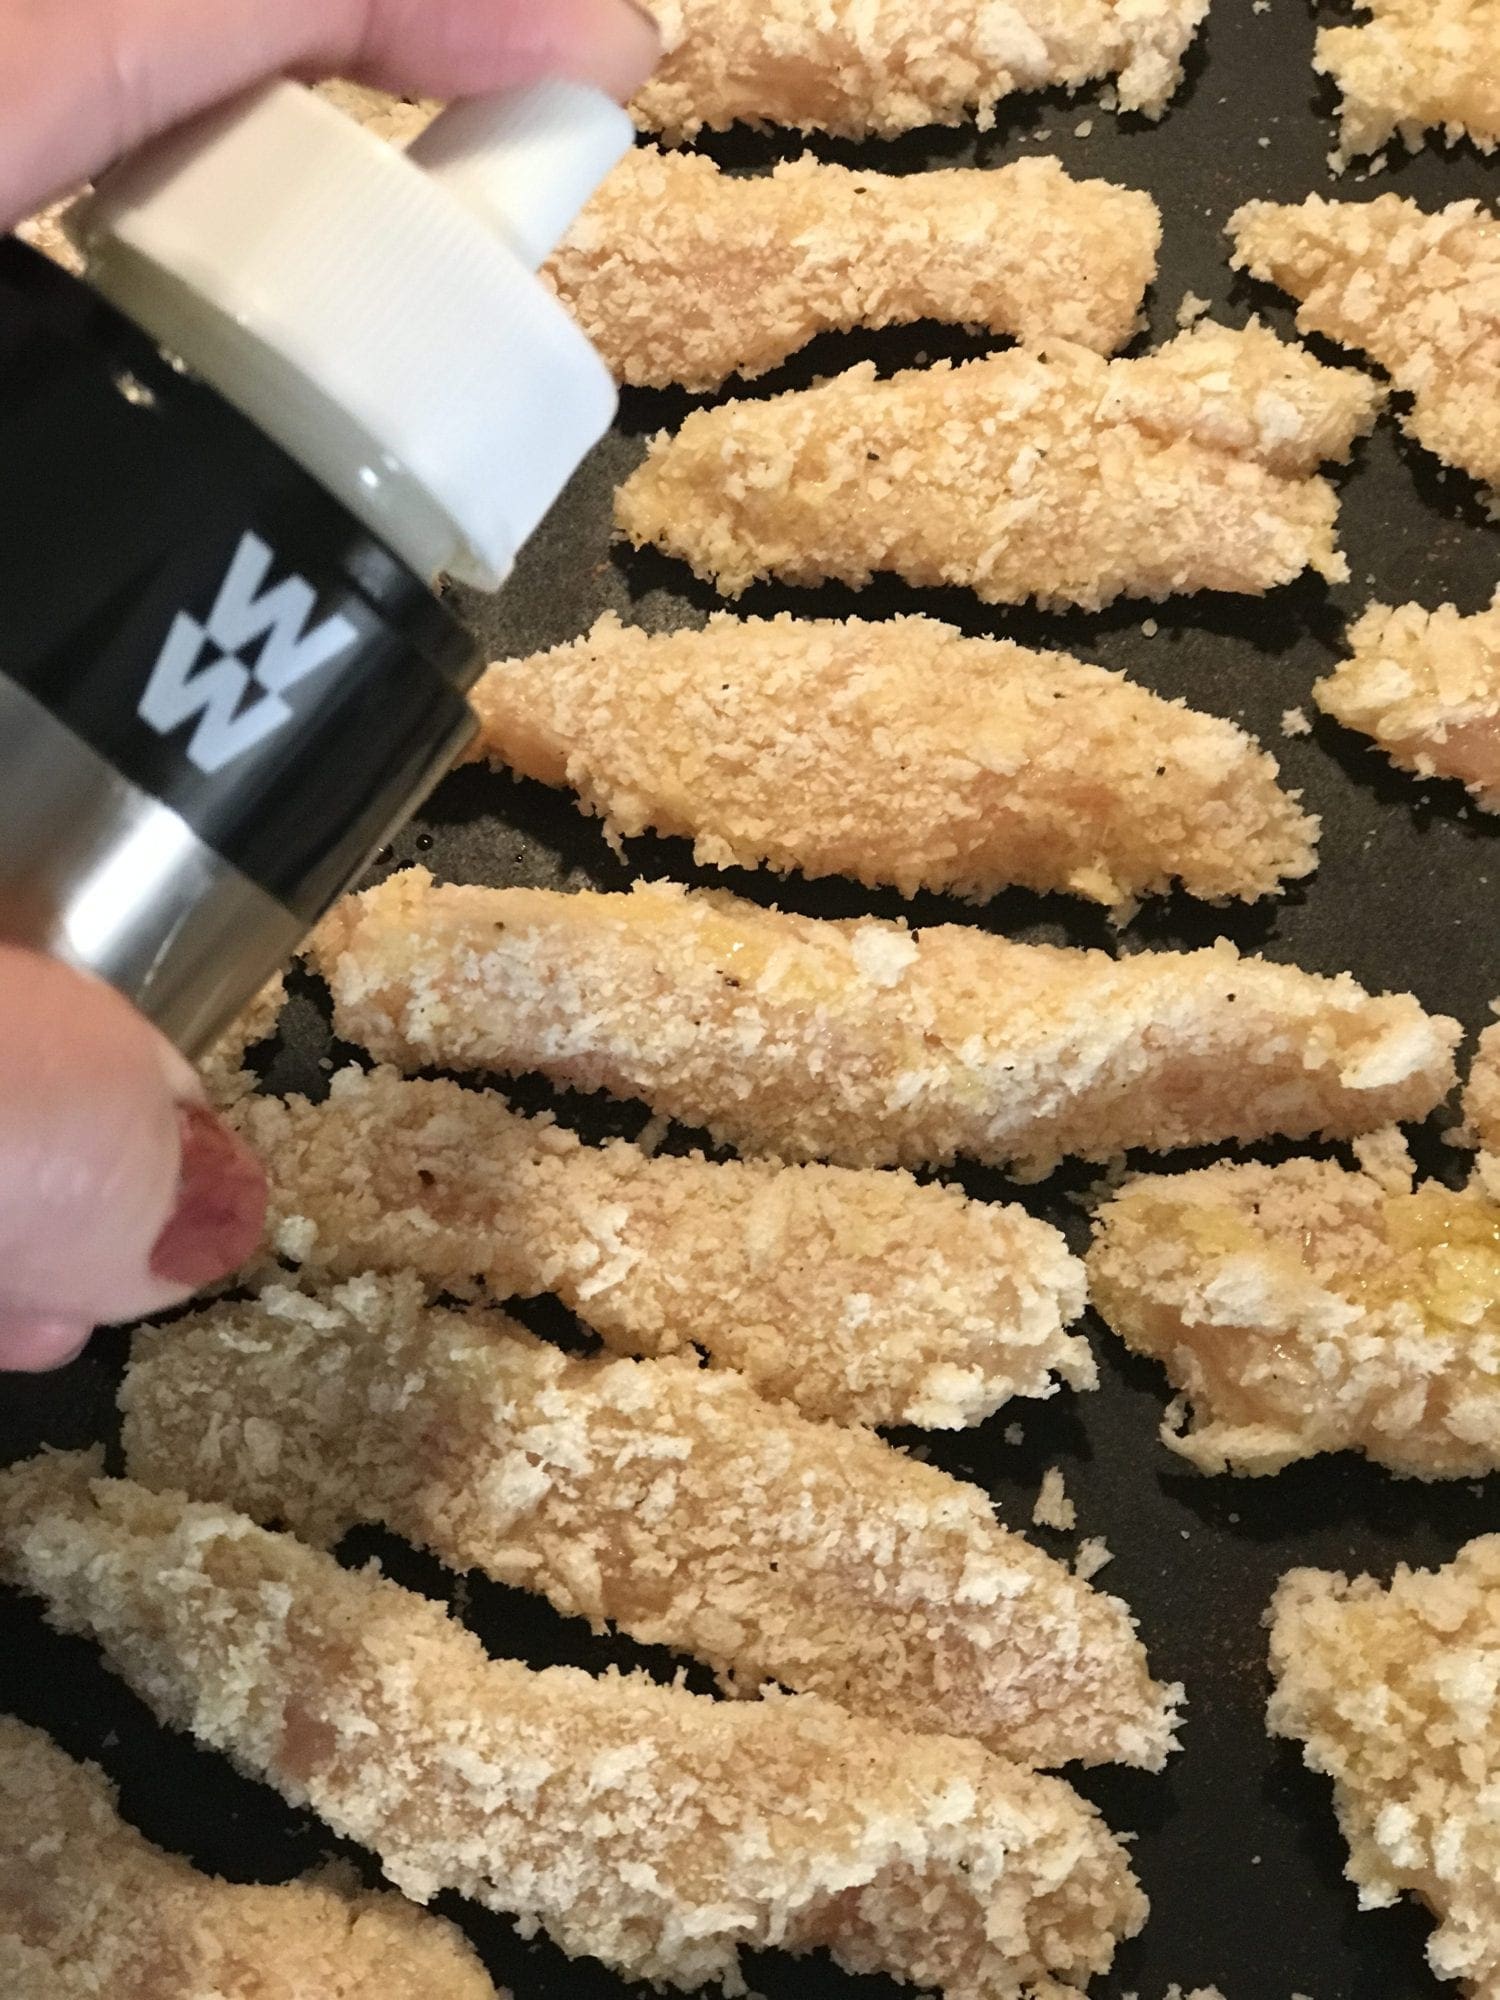 Spray chicken fries with cooking spray and baked until slightly browned.